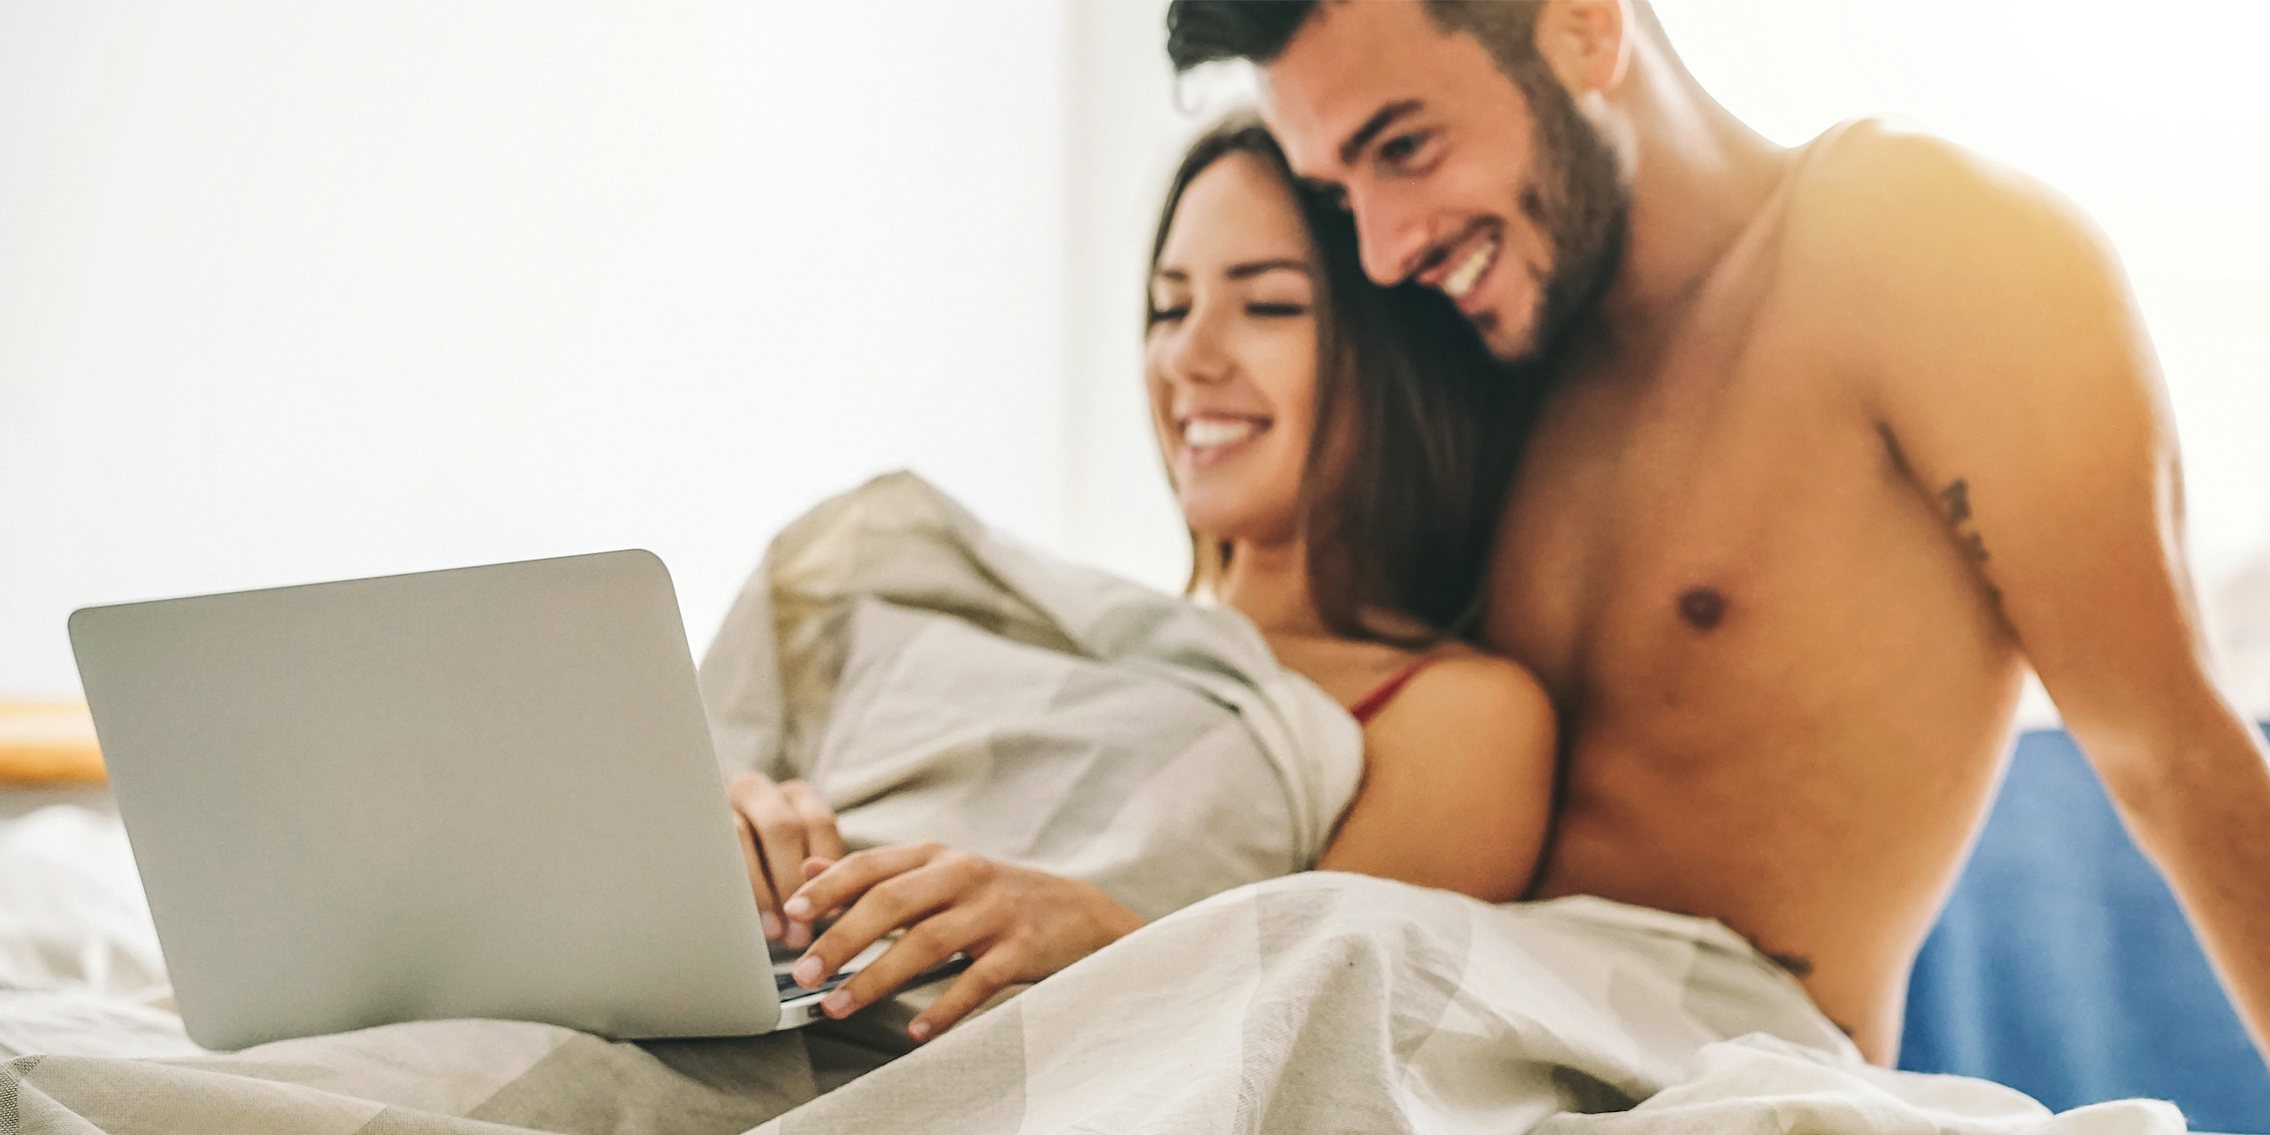 2270px x 1135px - Porn For Couples: The Best Couple Porn to Watch and Explore Together